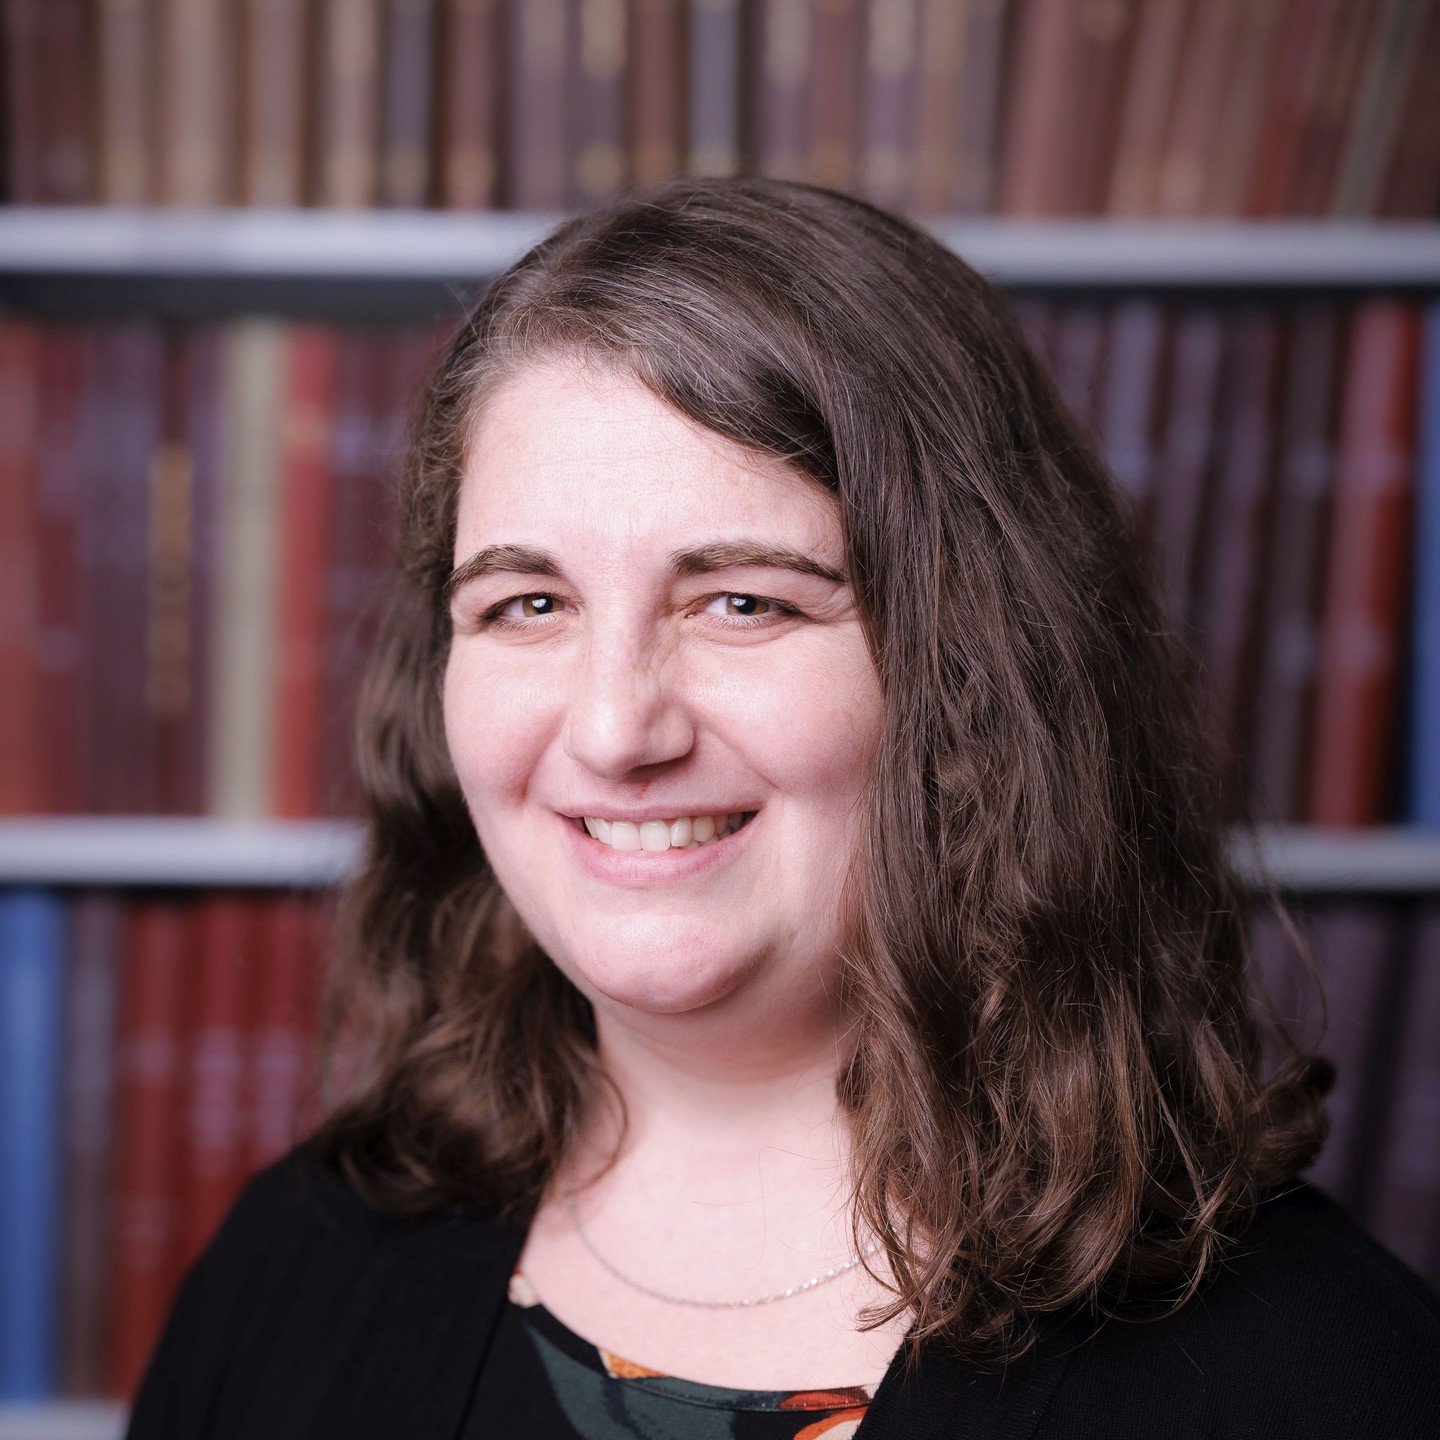 Leah Weinryb Grohsgal, 
Washington, D.C.

My career in cultural heritage organizations is informed by my background both as a librarian and a historian specializing in twentieth-century American civil liberties, law, and religion. Currently, I am the